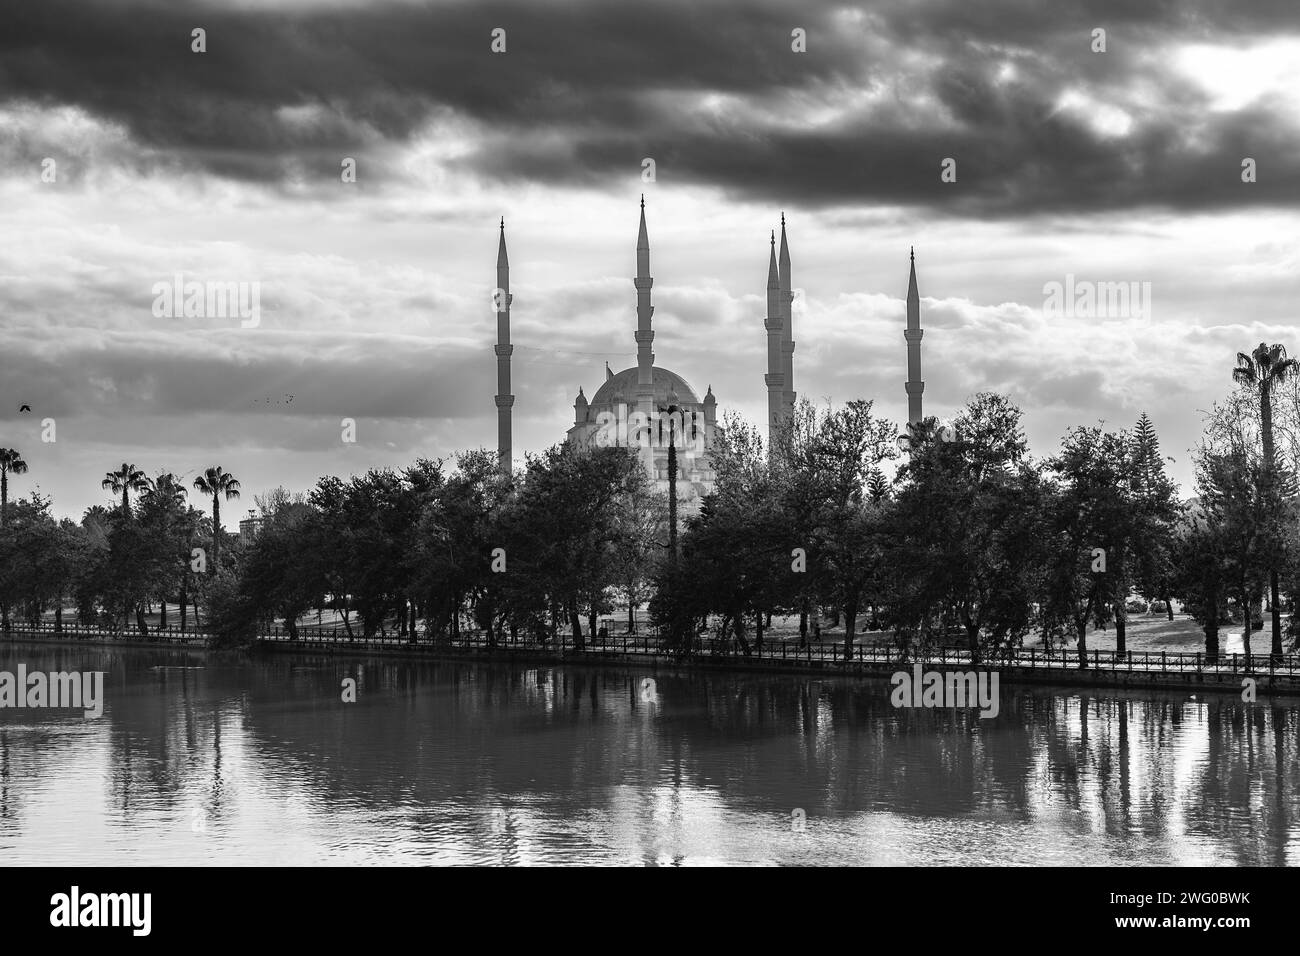 The Sabanci Central Mosque in Adana,  located along the Seyhan River, Turkiye. Opened in 1988. Stock Photo